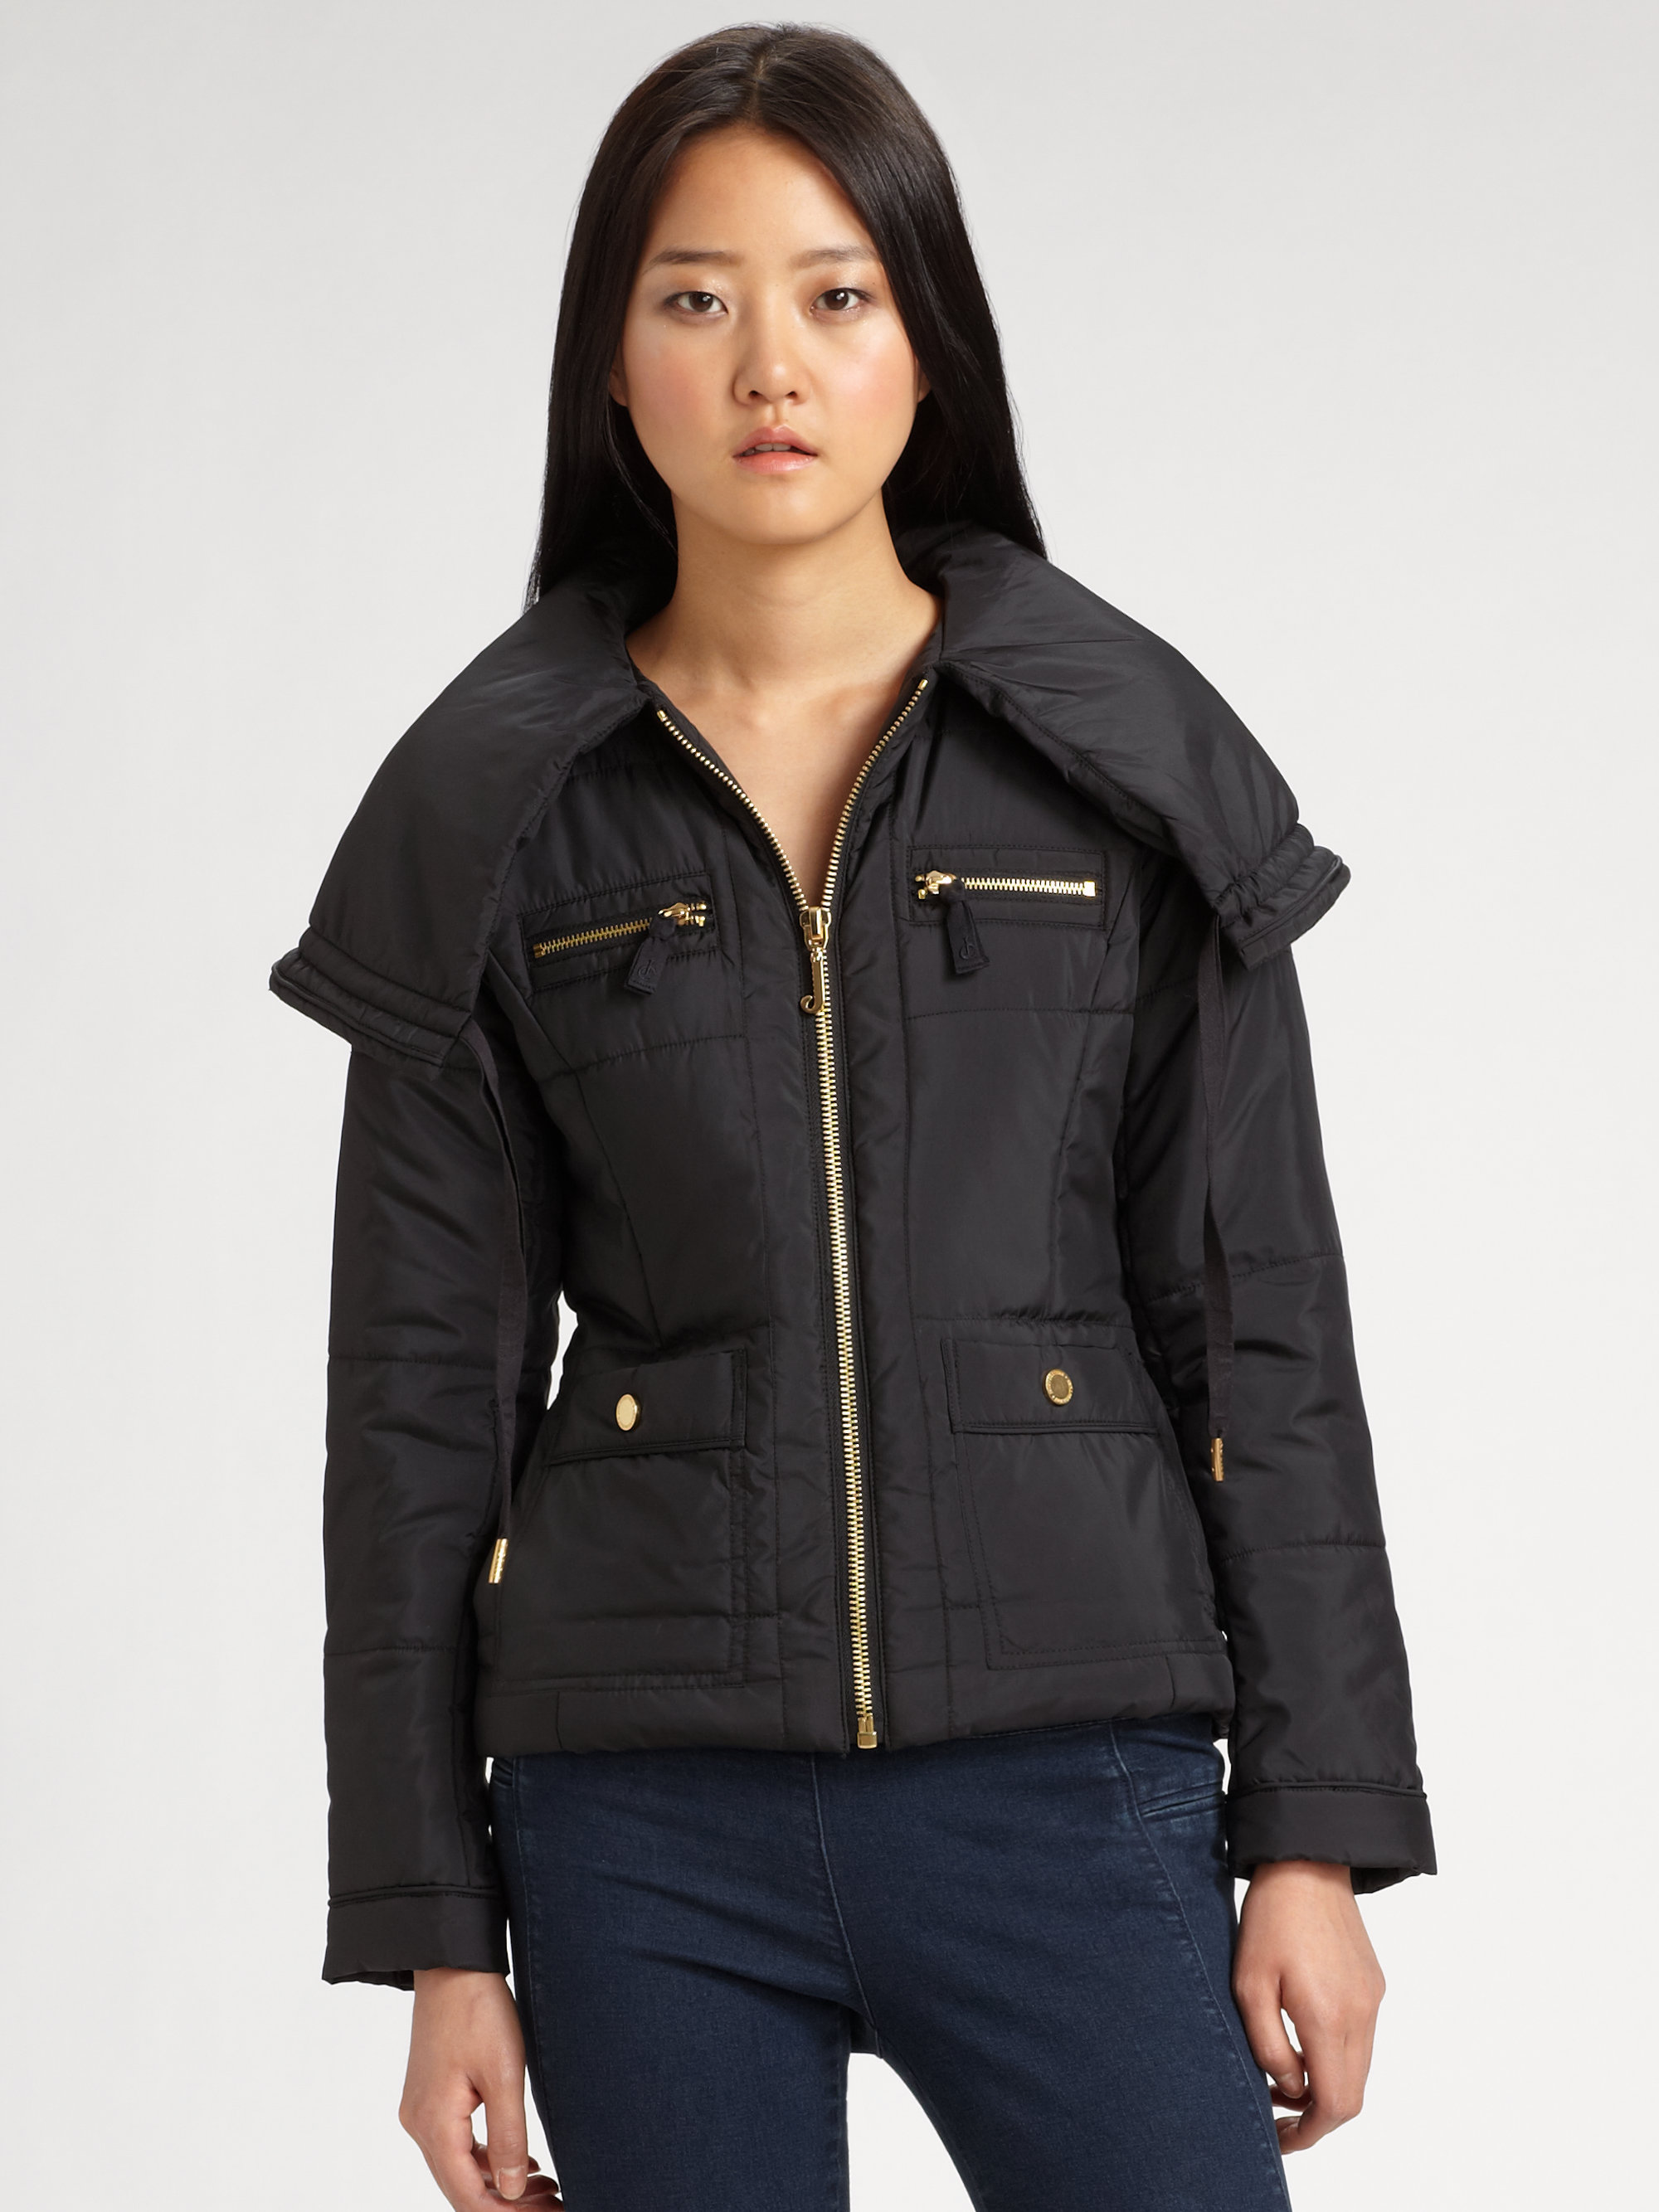 Juicy couture Puffer Jacket in Gray (black) | Lyst